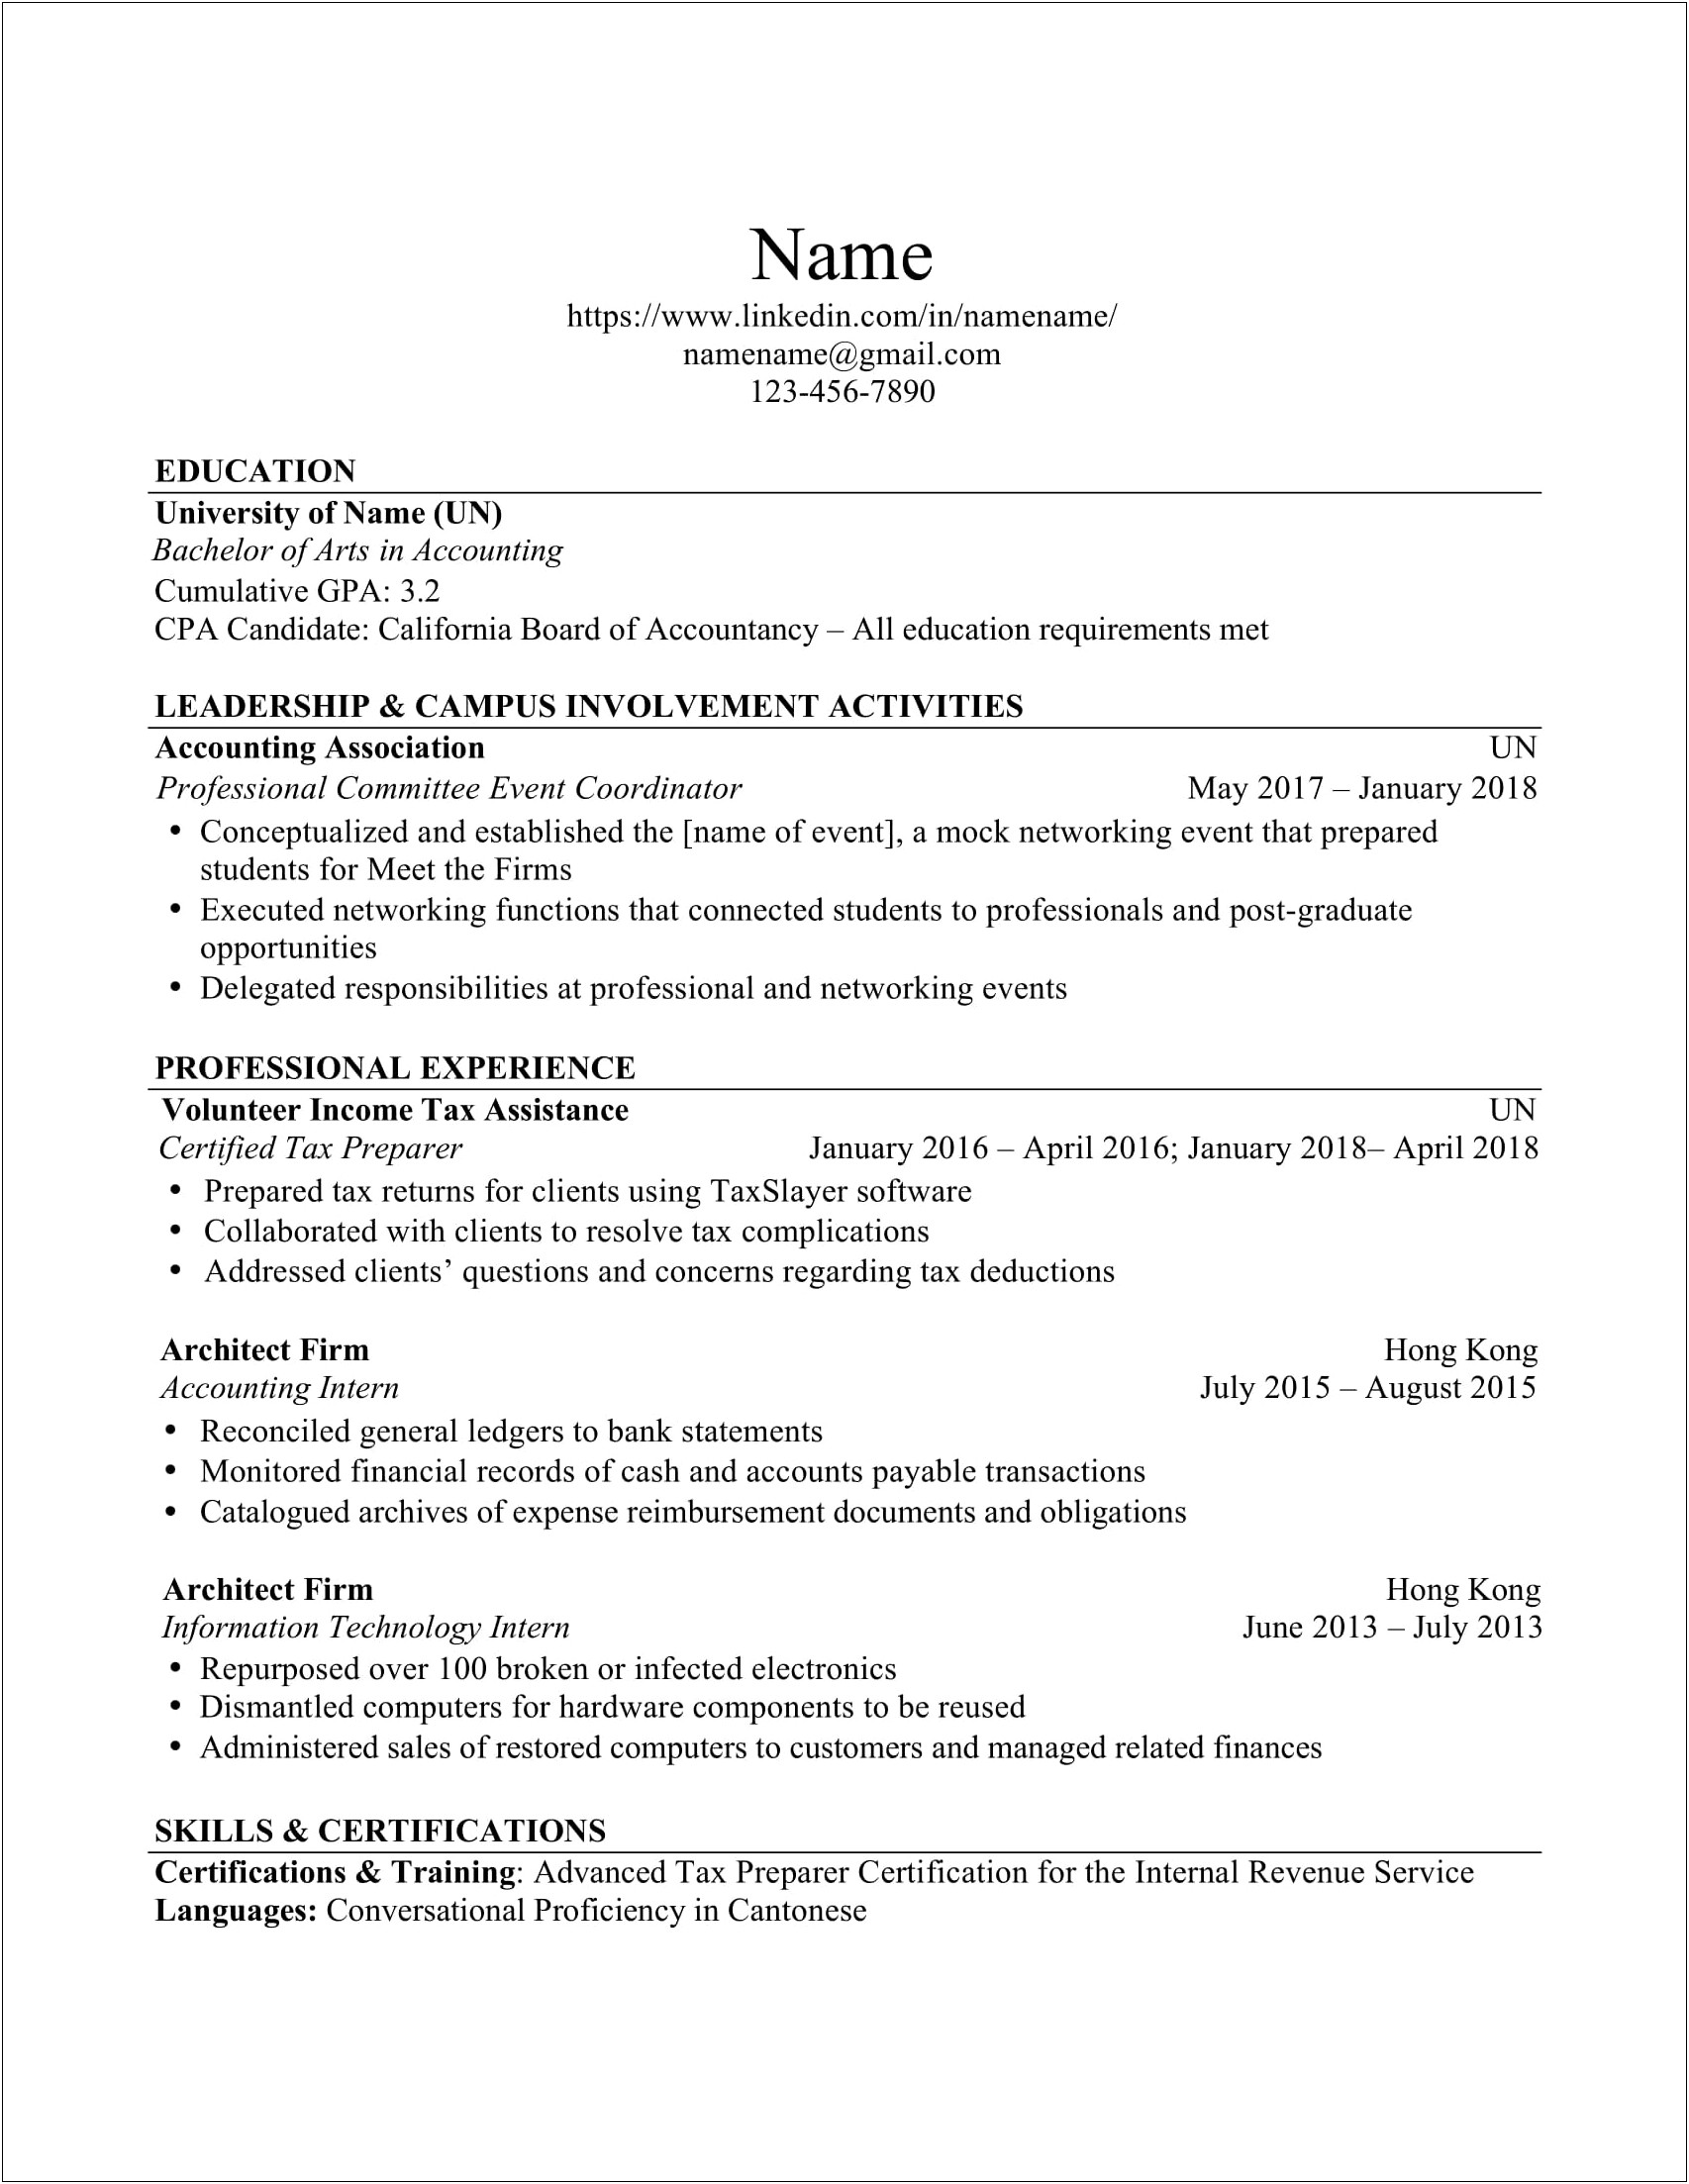 Accounting Internship Resume With No Accounting Experience